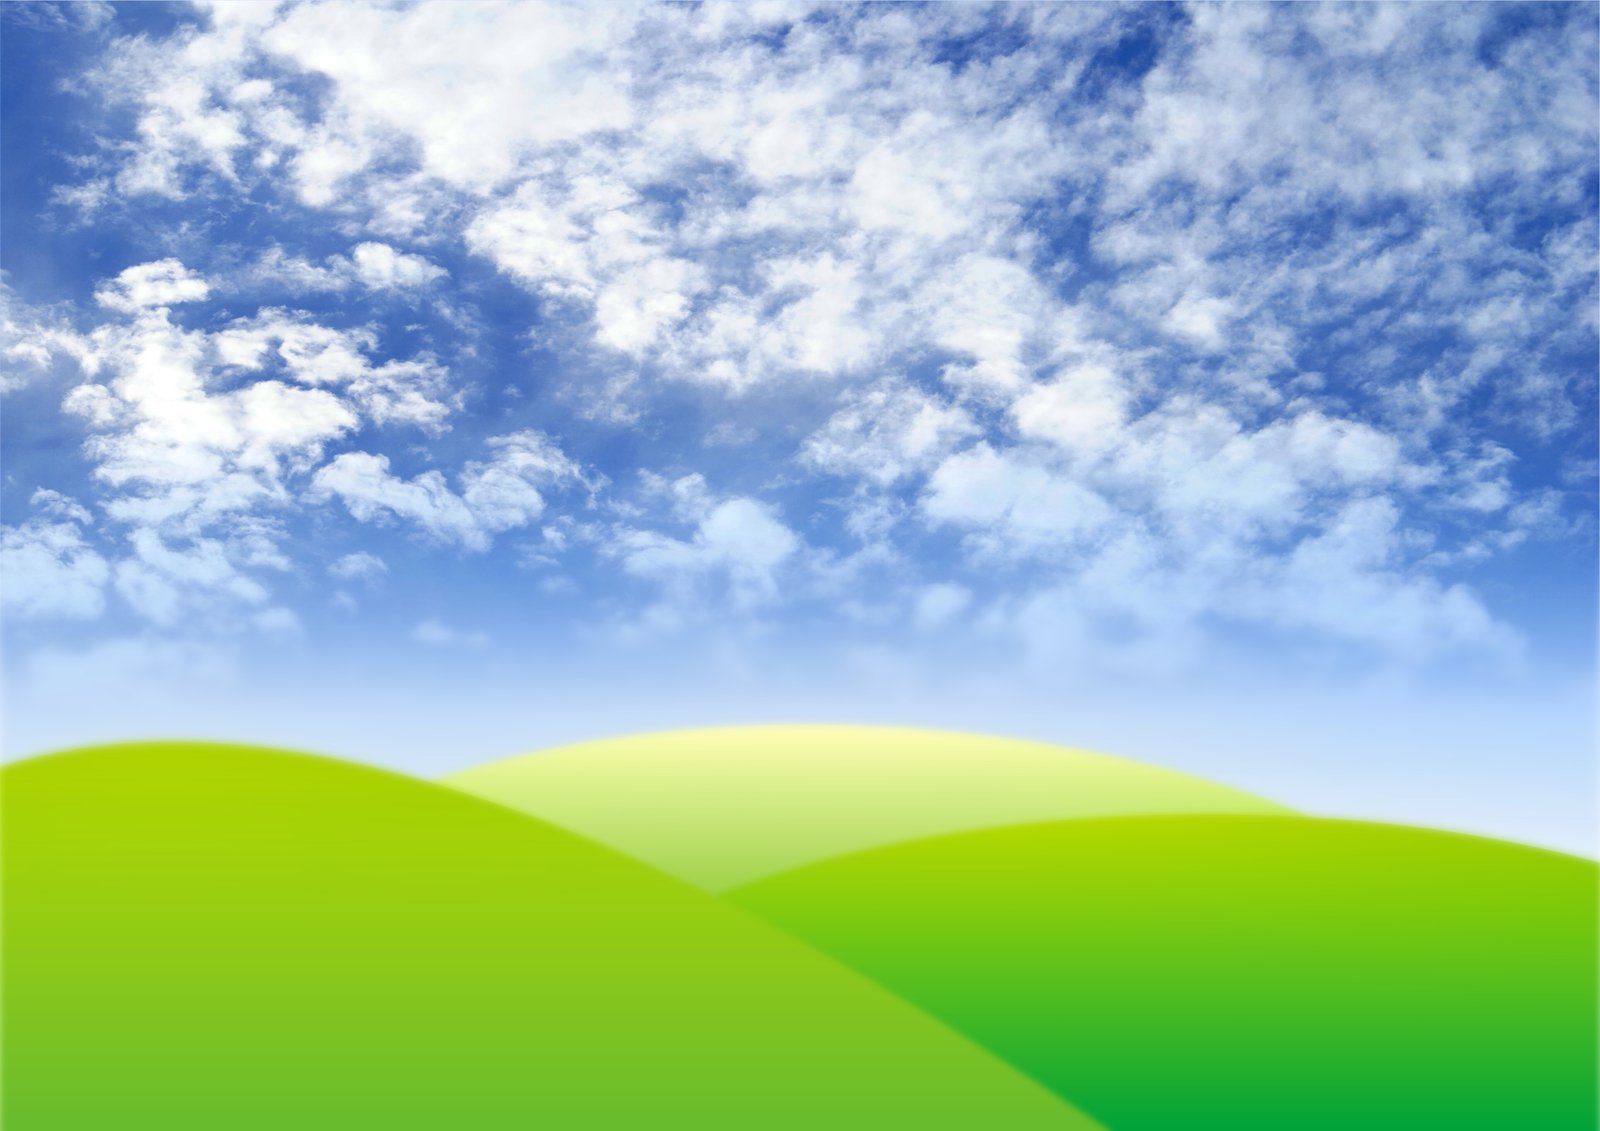 an abstract scene with white clouds and green grass